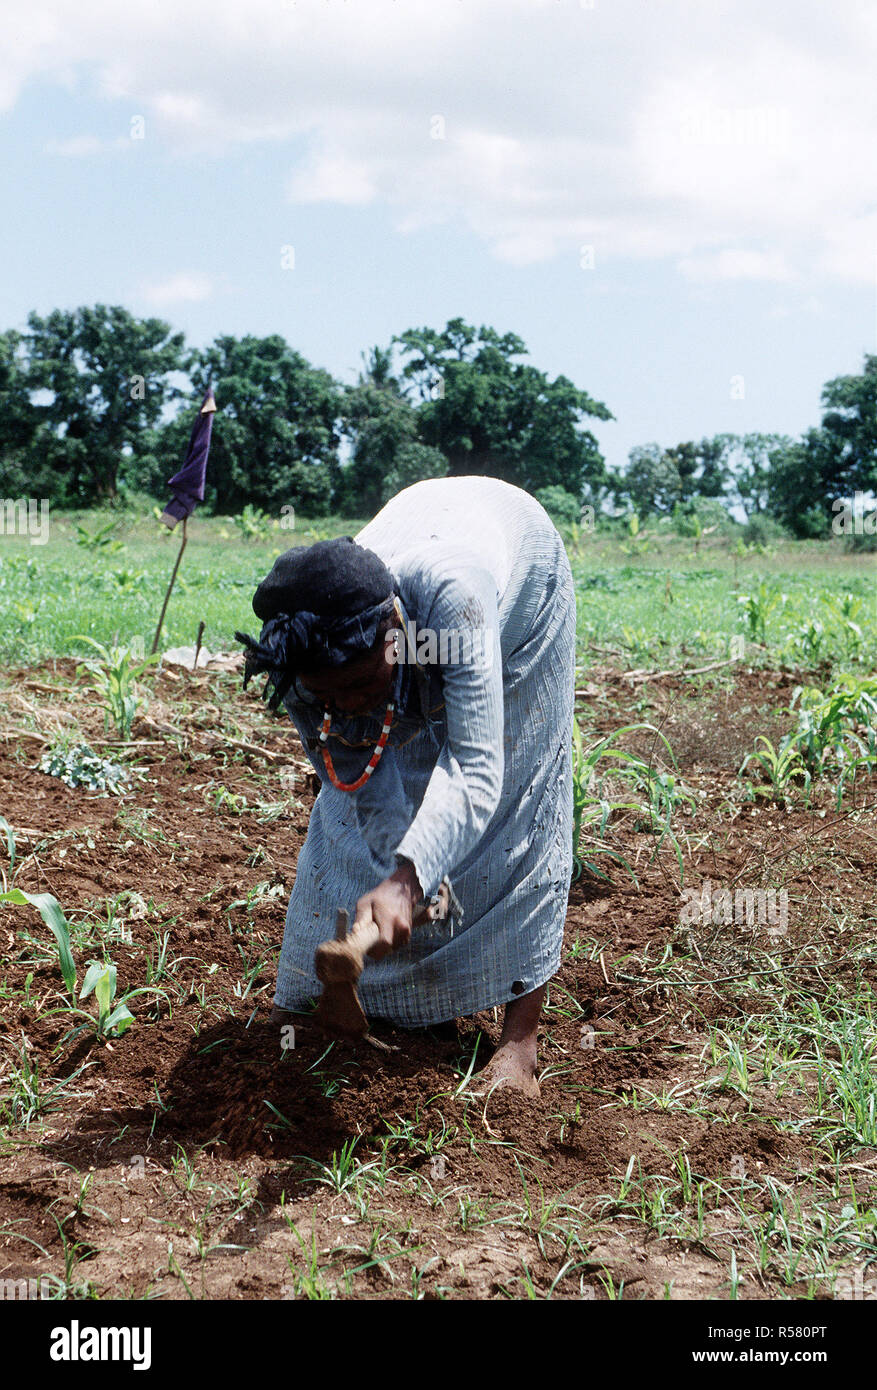 A Somali woman working in the fields in Kismayo, Somalia while U.S. Forces were in Somalia for Operation Continue Hope. Stock Photo